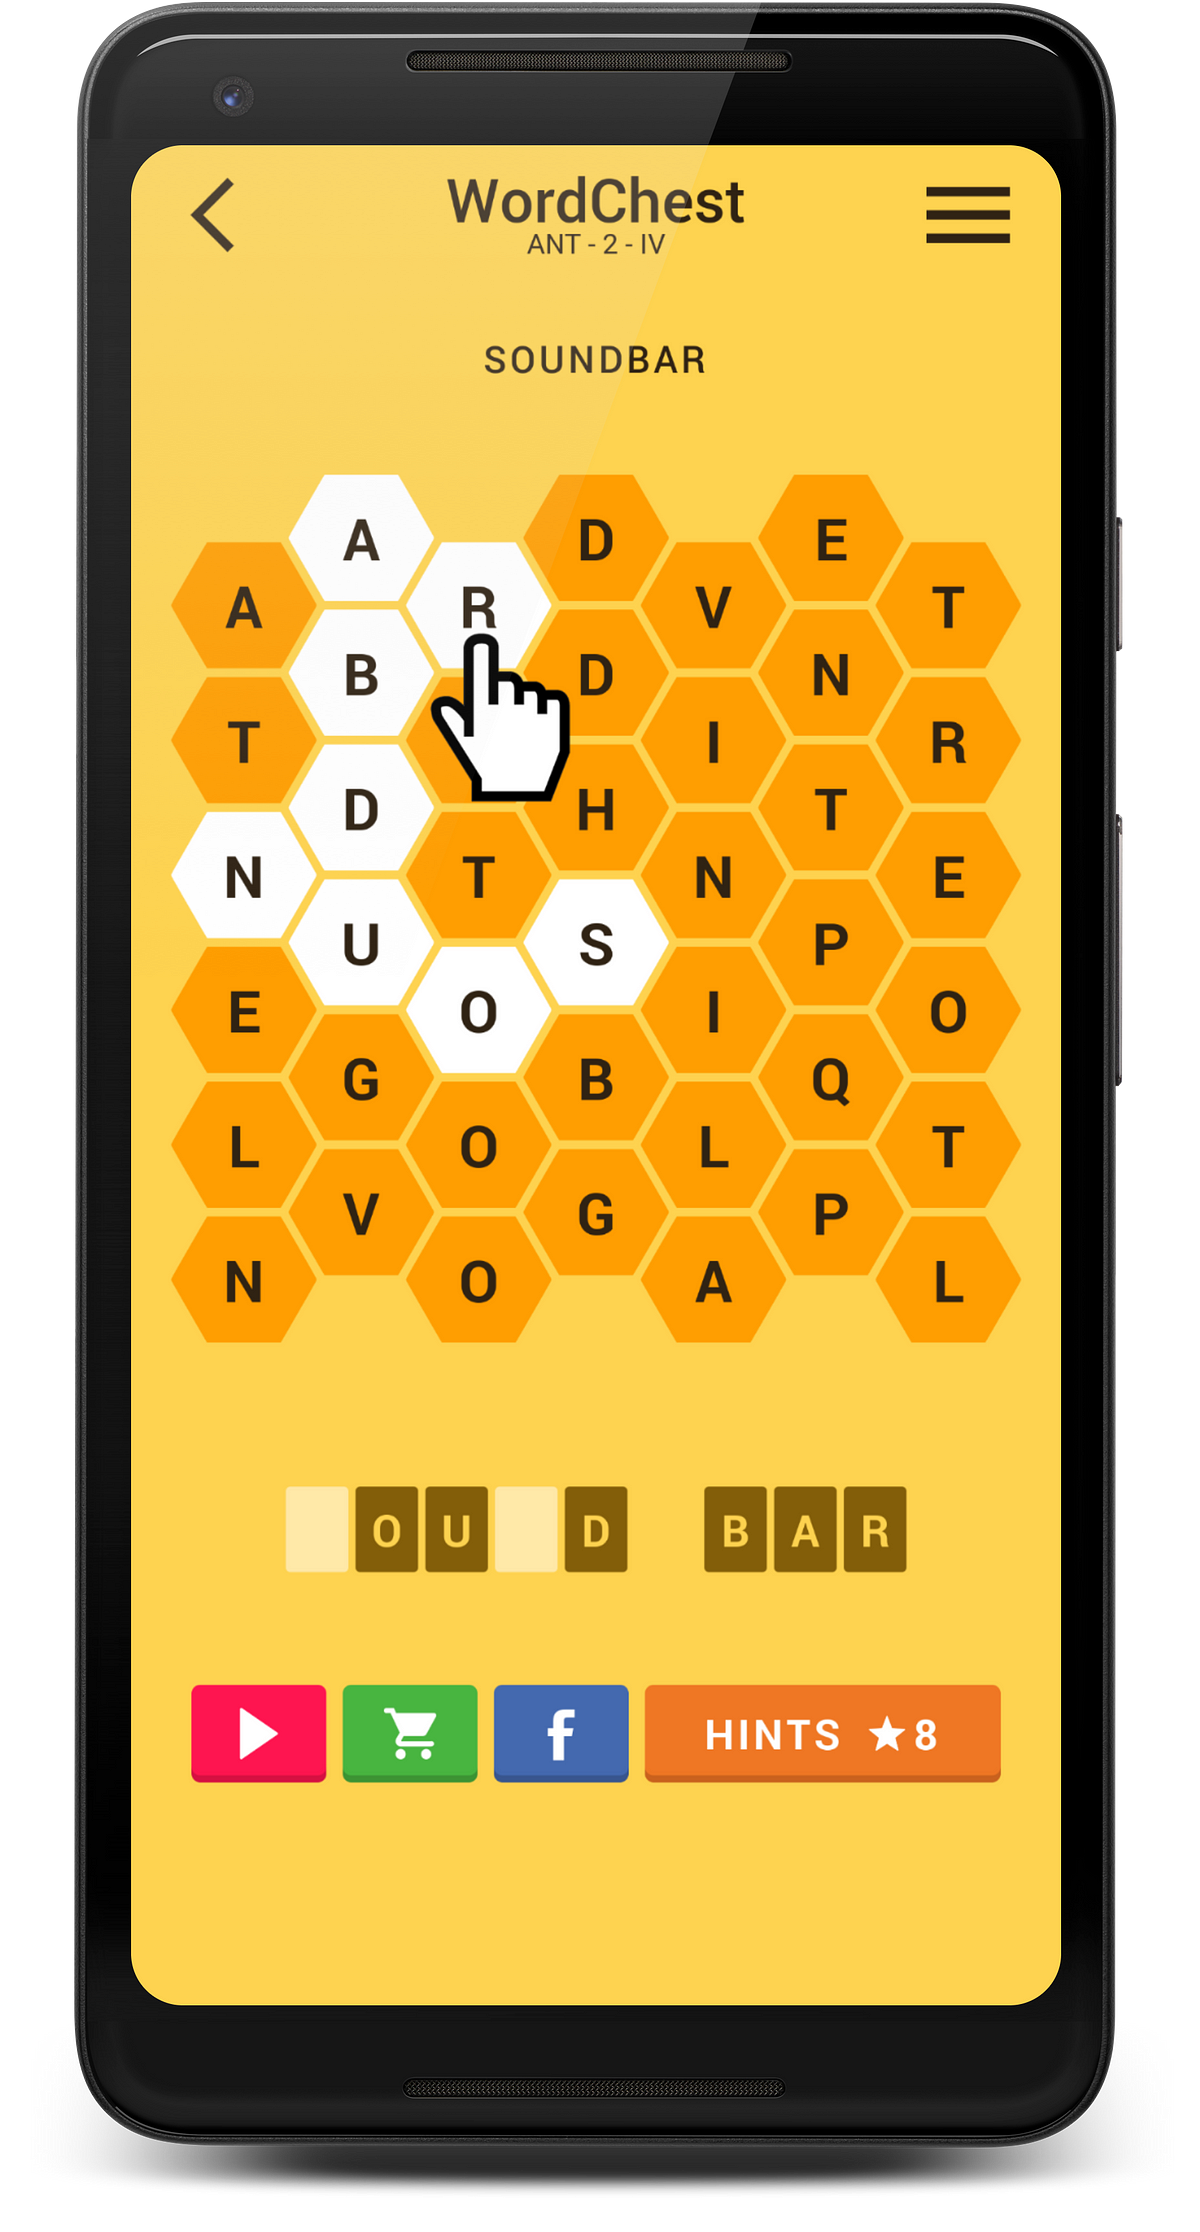 word-chest-free-word-search-connect-game-spearmint-games-medium